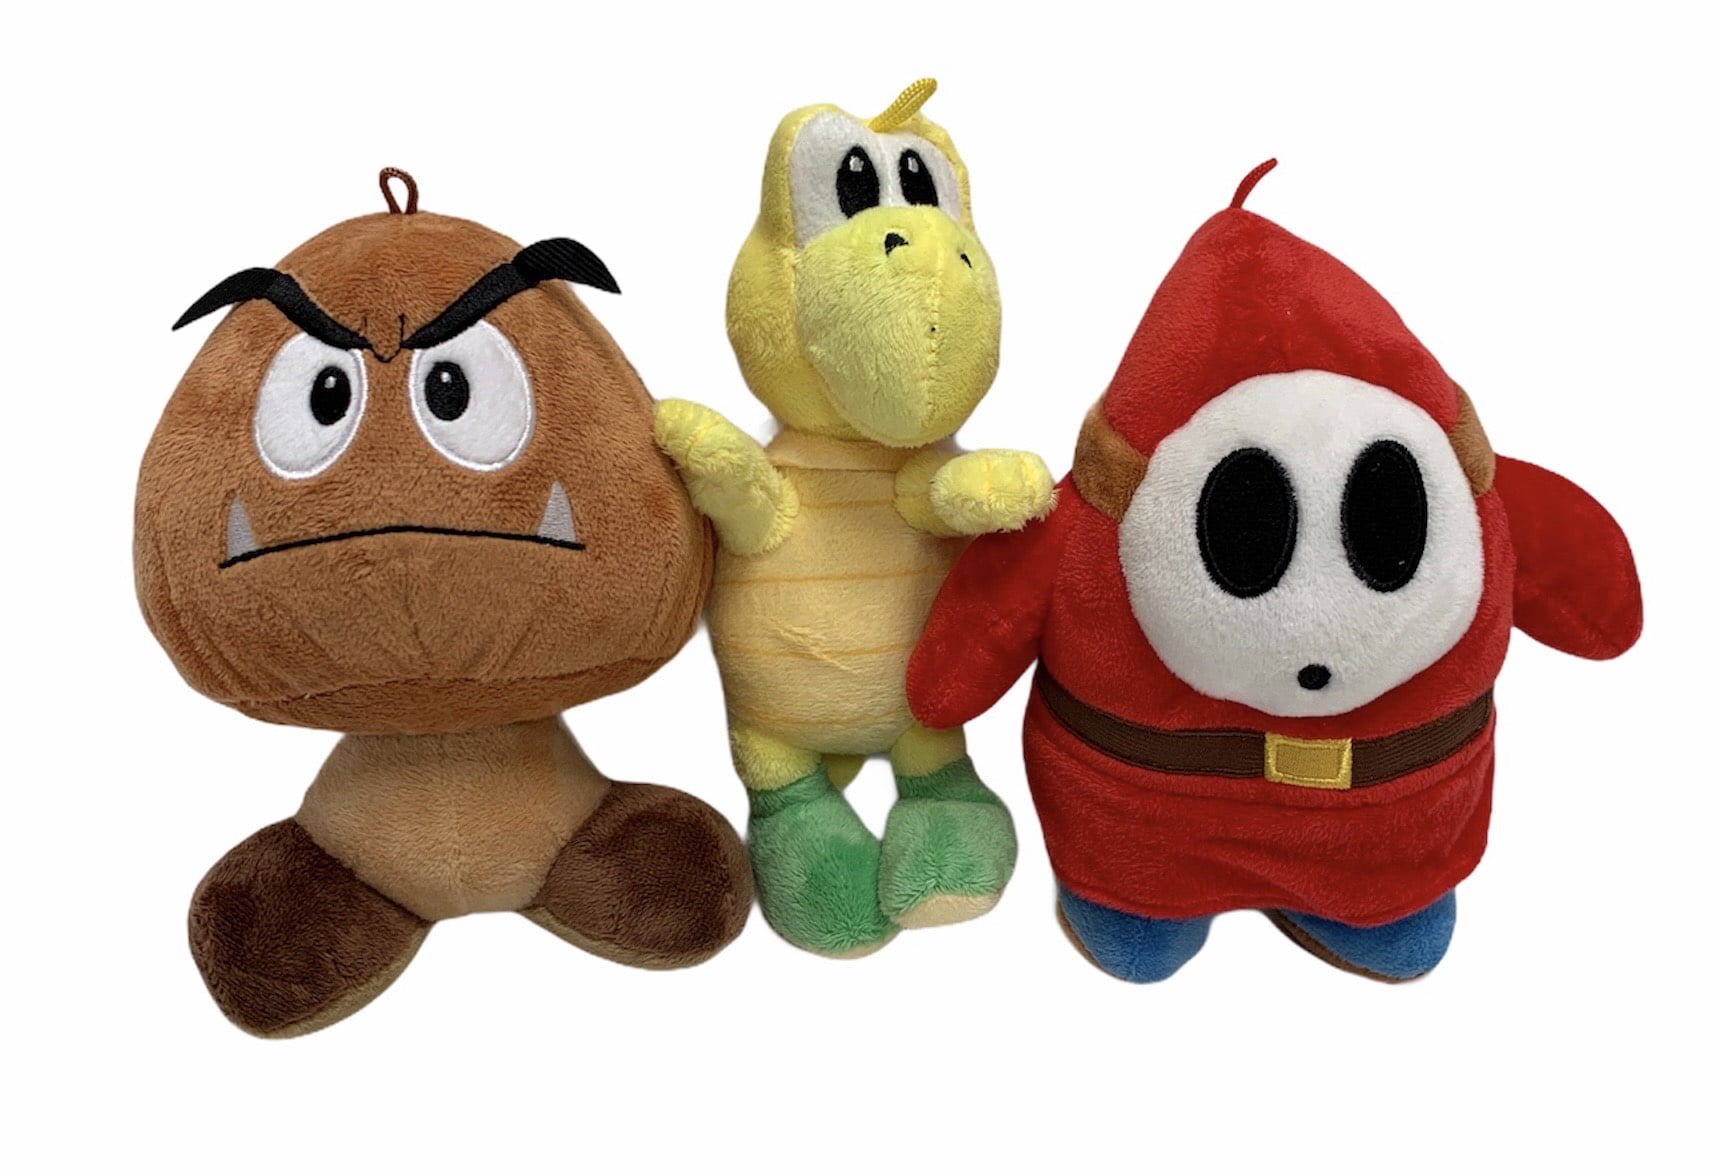 Details about  / 6/'/' Super Mario Bros.Sad Goomba Stuffed Plush Doll Toy Cute Gift S90